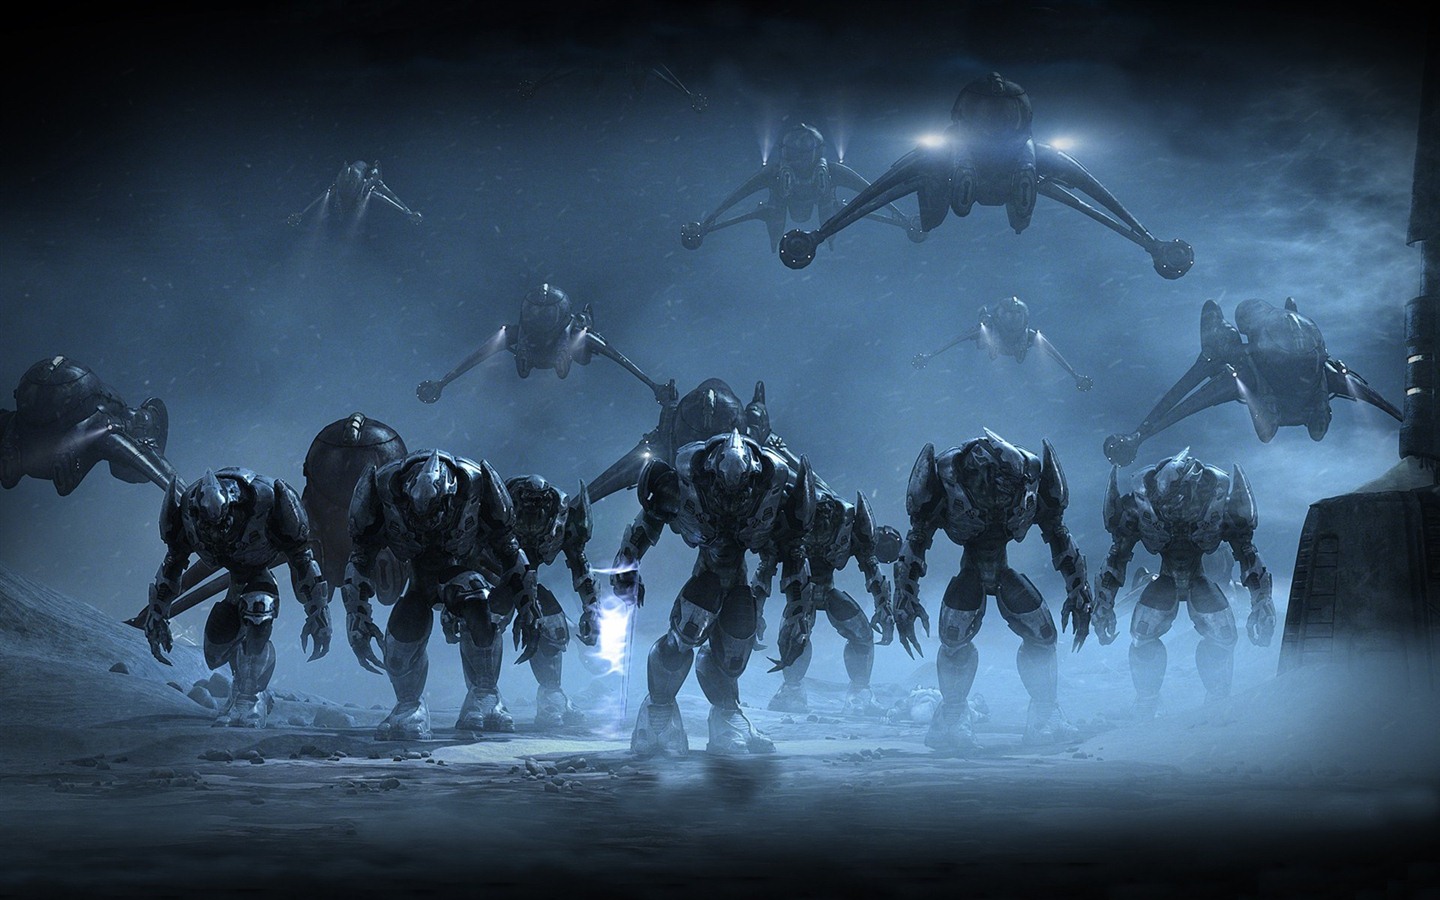 Halo game HD wallpapers #26 - 1440x900